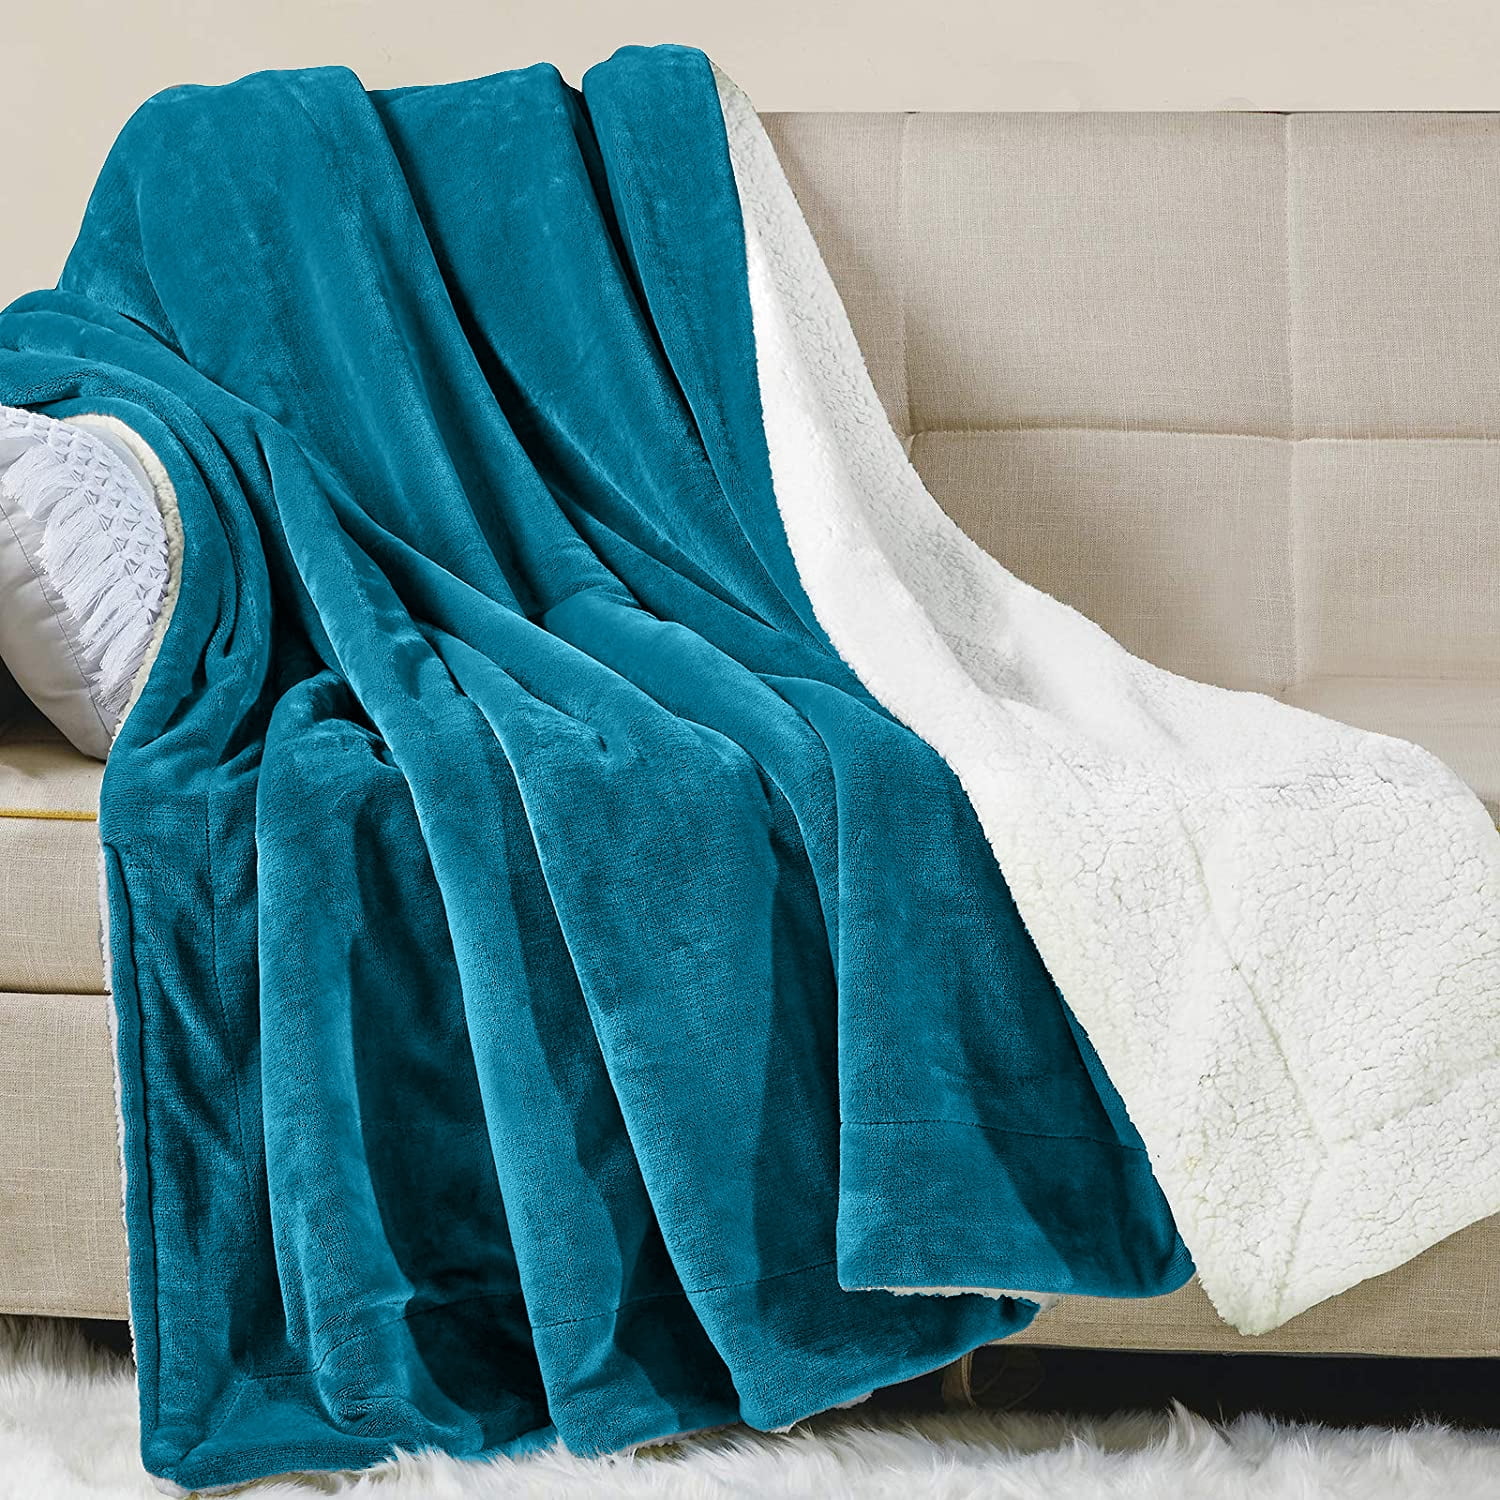 Blue 60 “x 70" New Open Package Mon Chateau Ultimate Plush Sherpa Throw 